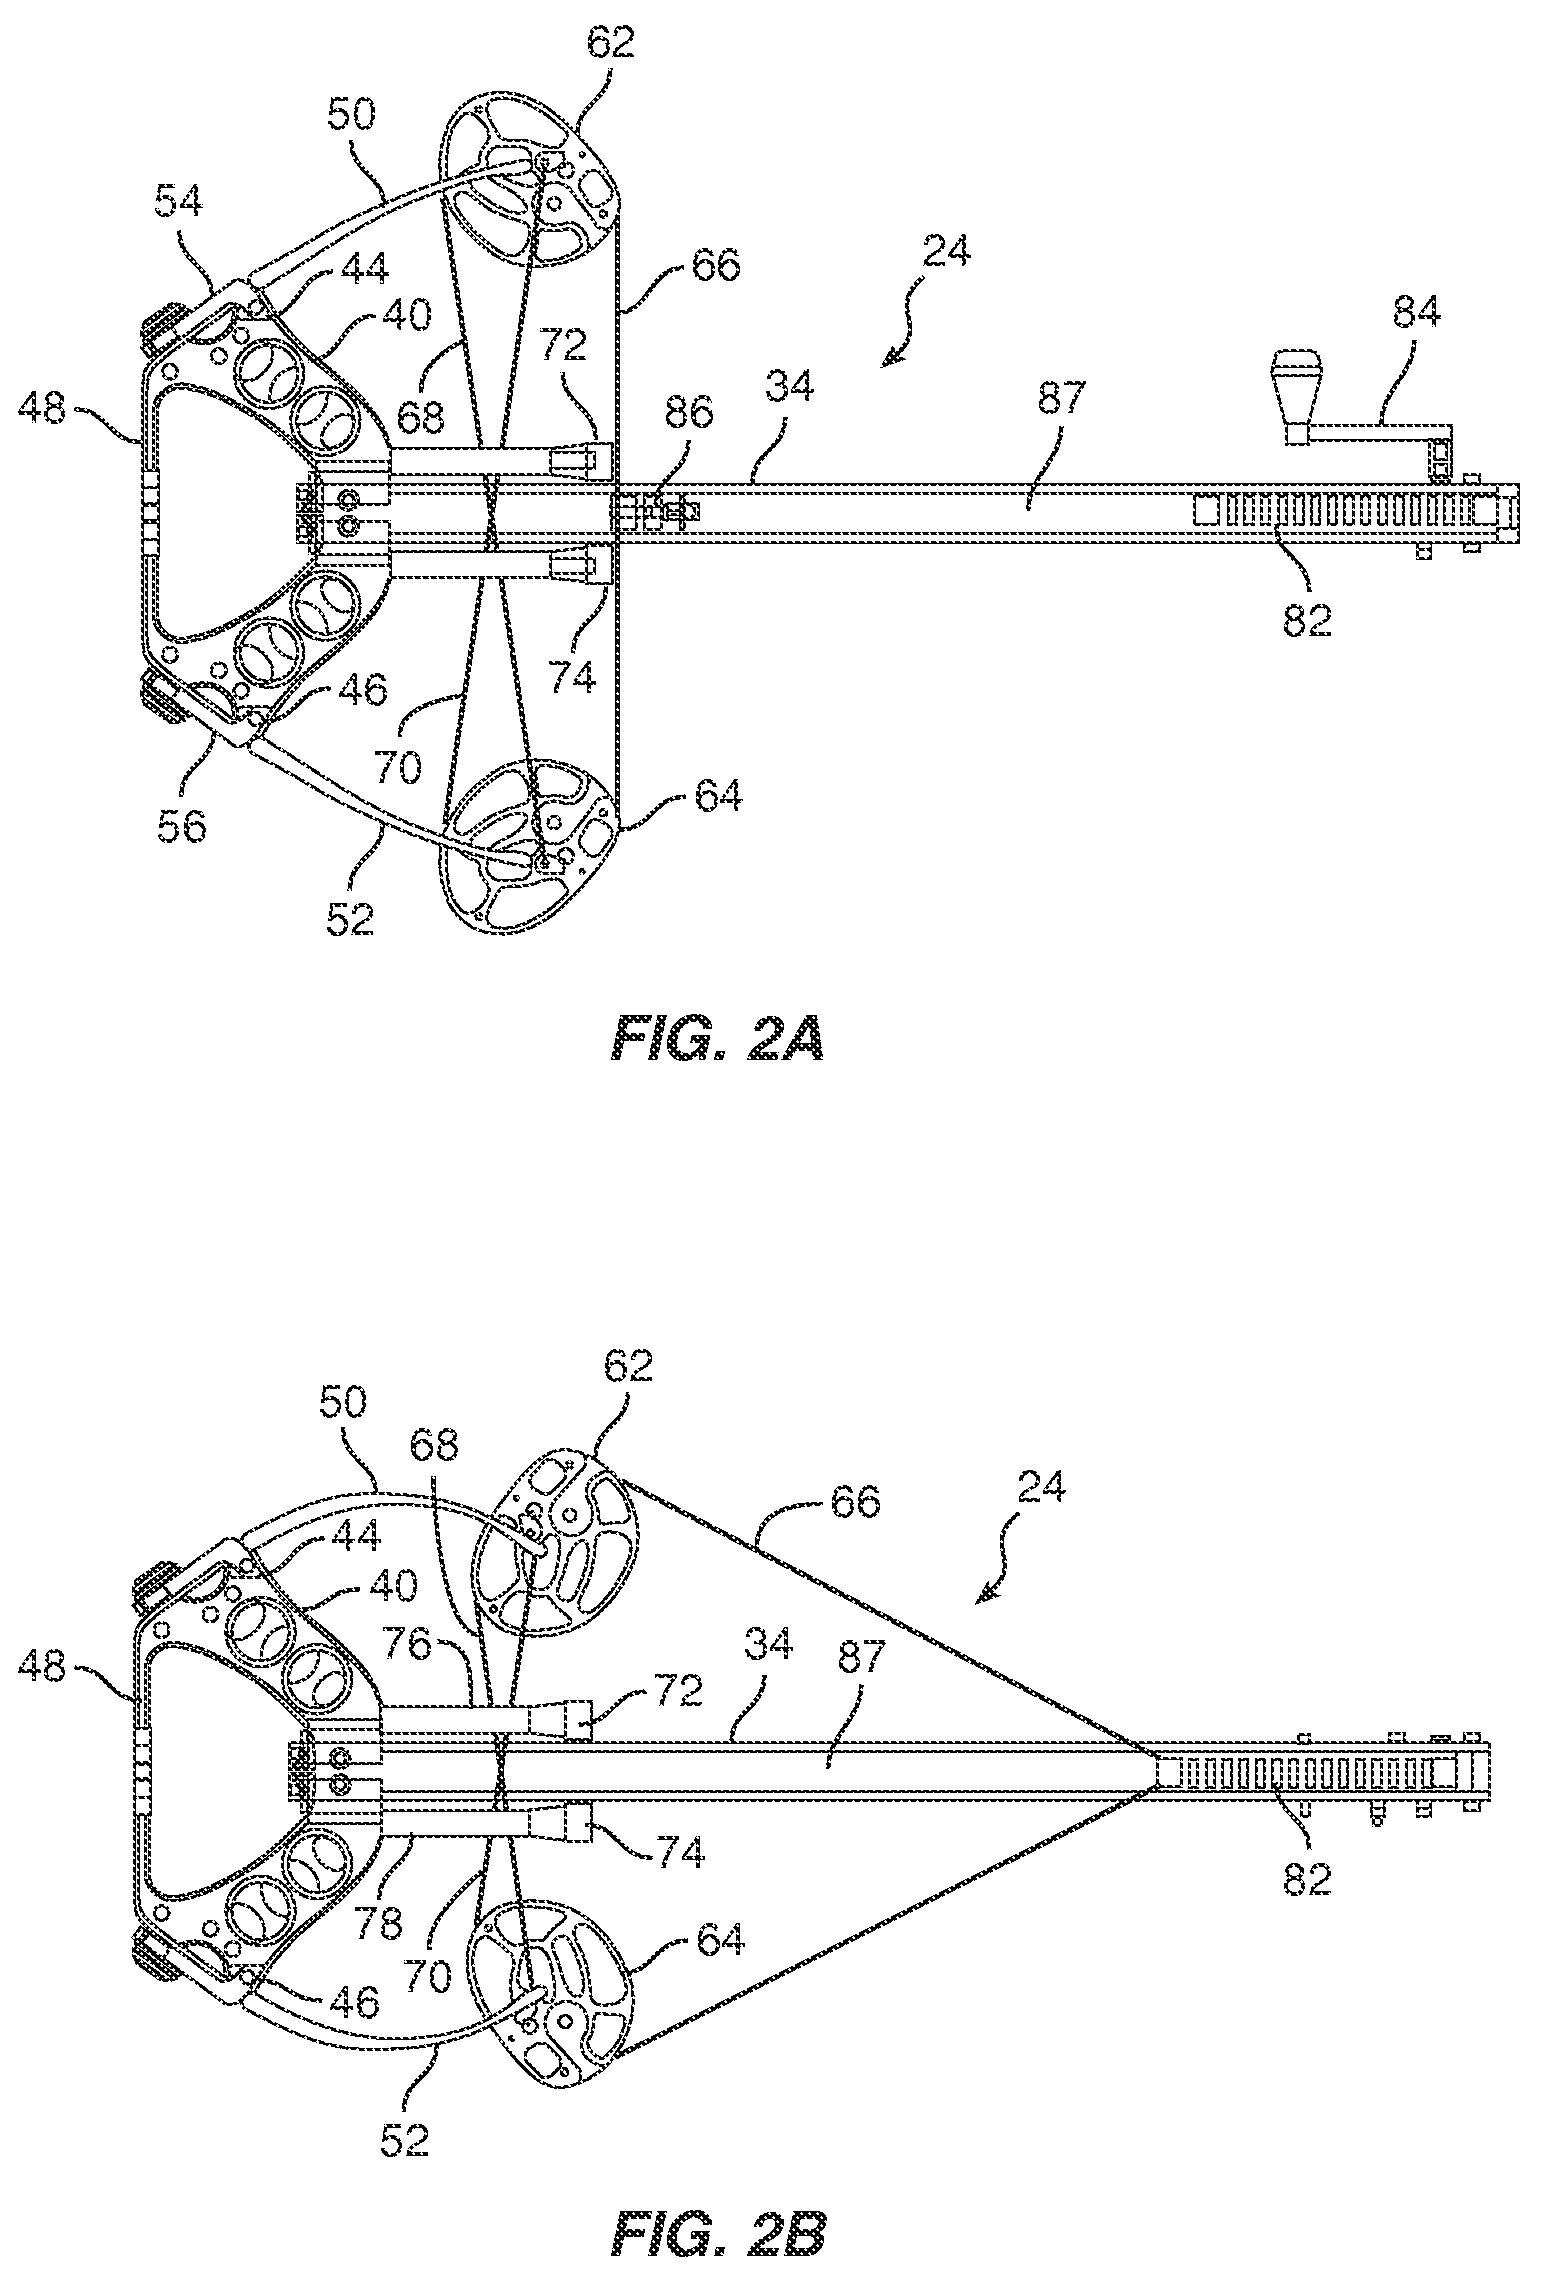 Crossbow accessory for lower receiver of rifle and related method